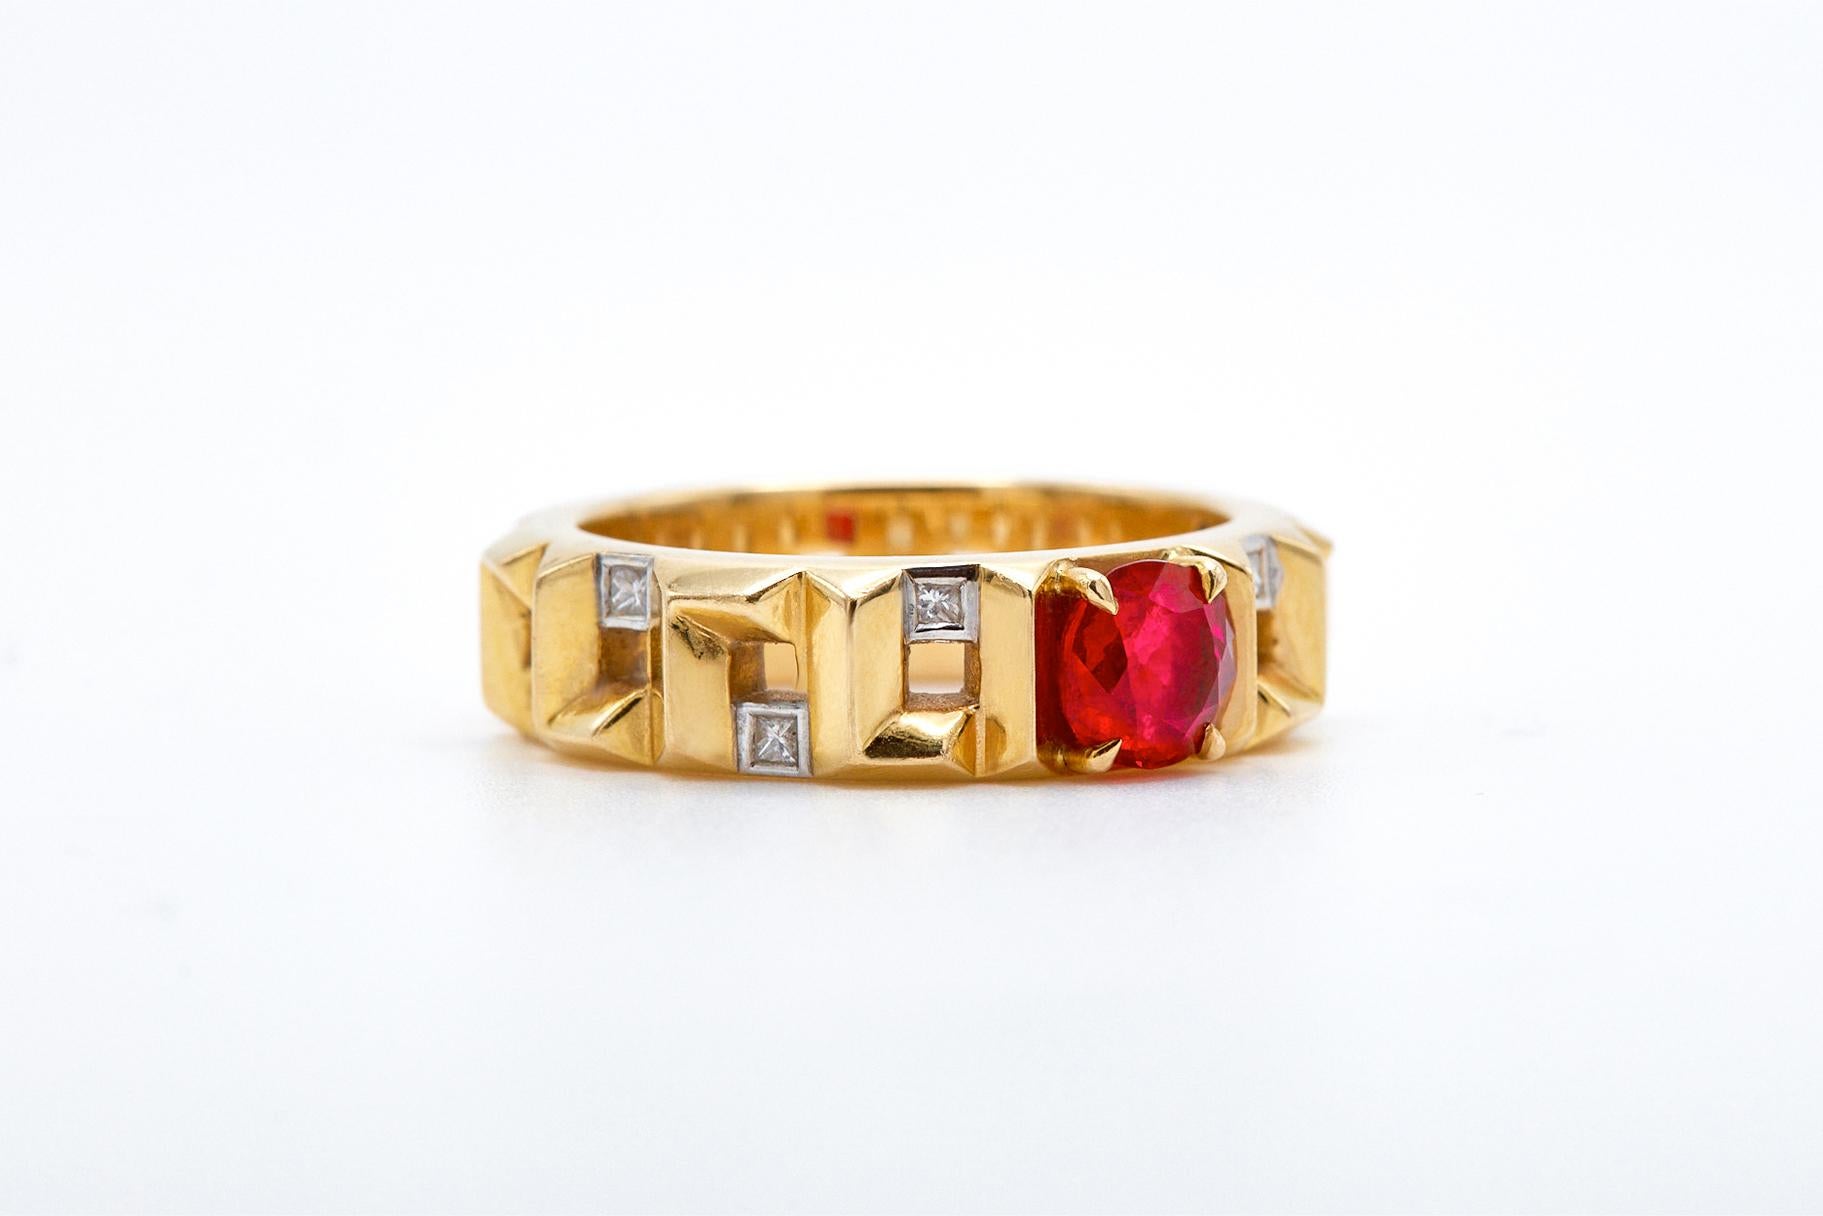 18K YELLOW GOLD 
6 DIAMONDS   0. 11 CARATS
1 NO-HEAT BURMESE RUBY  1.30 CARATS
AGL LAB CERTIFIED

Experience the timeless elegance of our Meandros Legacy ring. This exquisite piece combines classical Greek design with contemporary luxury, featuring